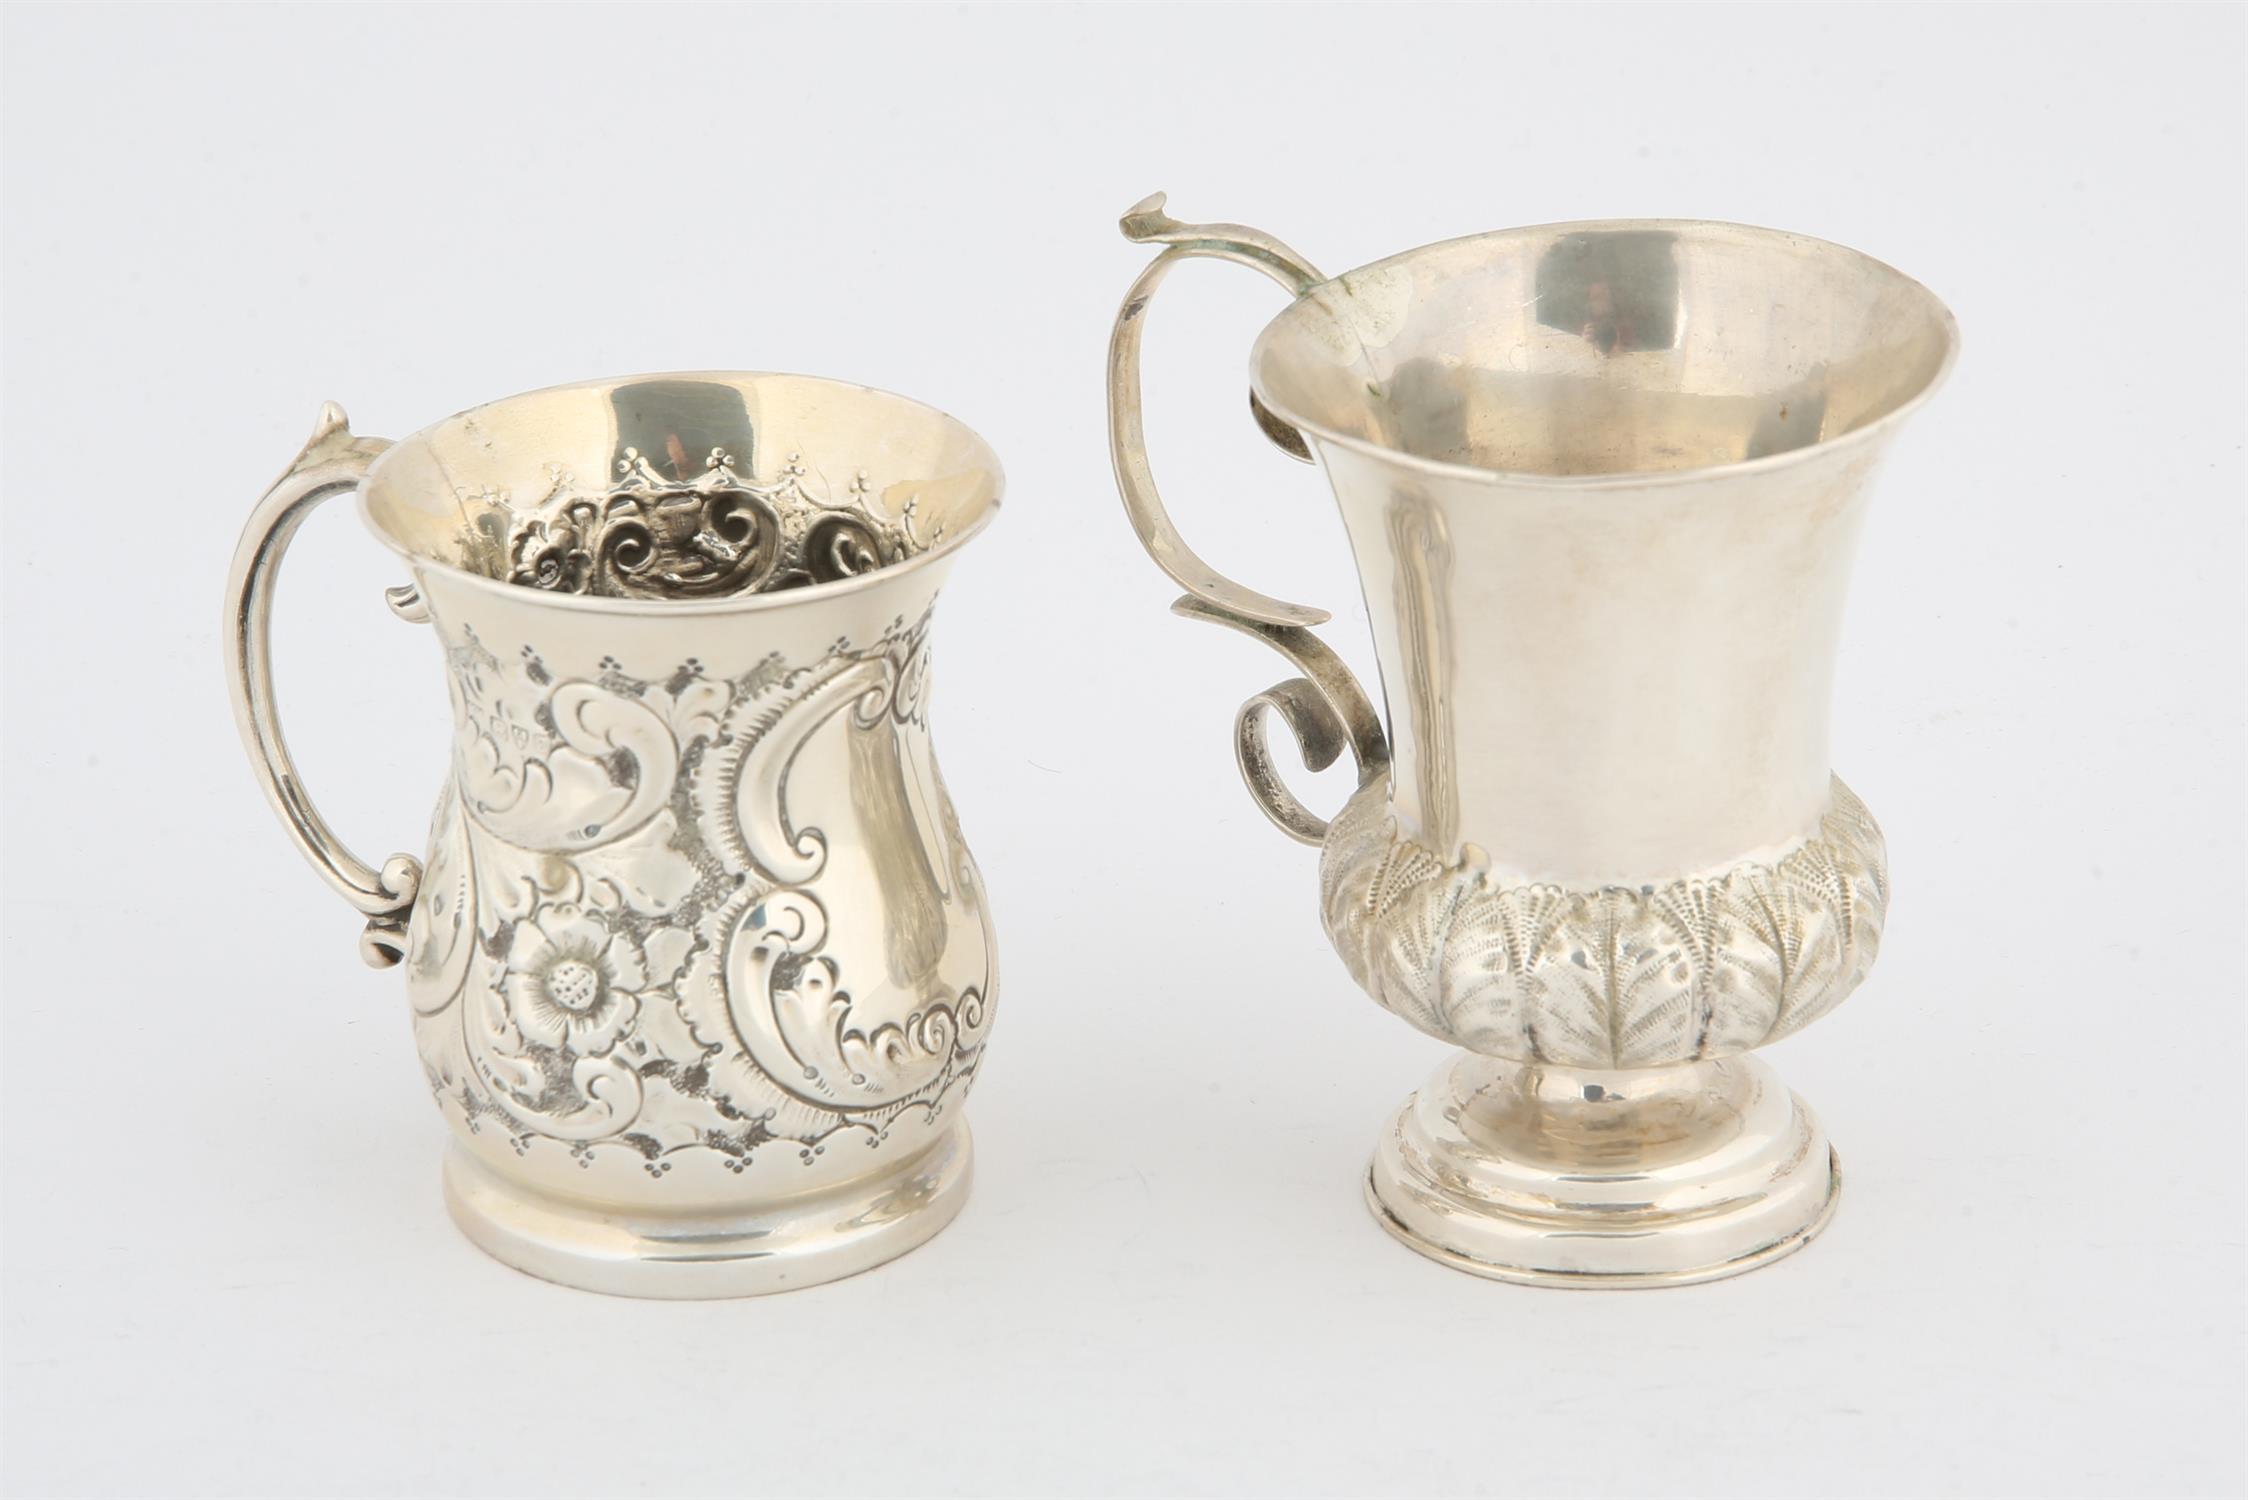 Two Victorian silver Christening mugs, 4 ozs 125 grams SILVER COLLECTION OF SIR RAY TINDLE CBE